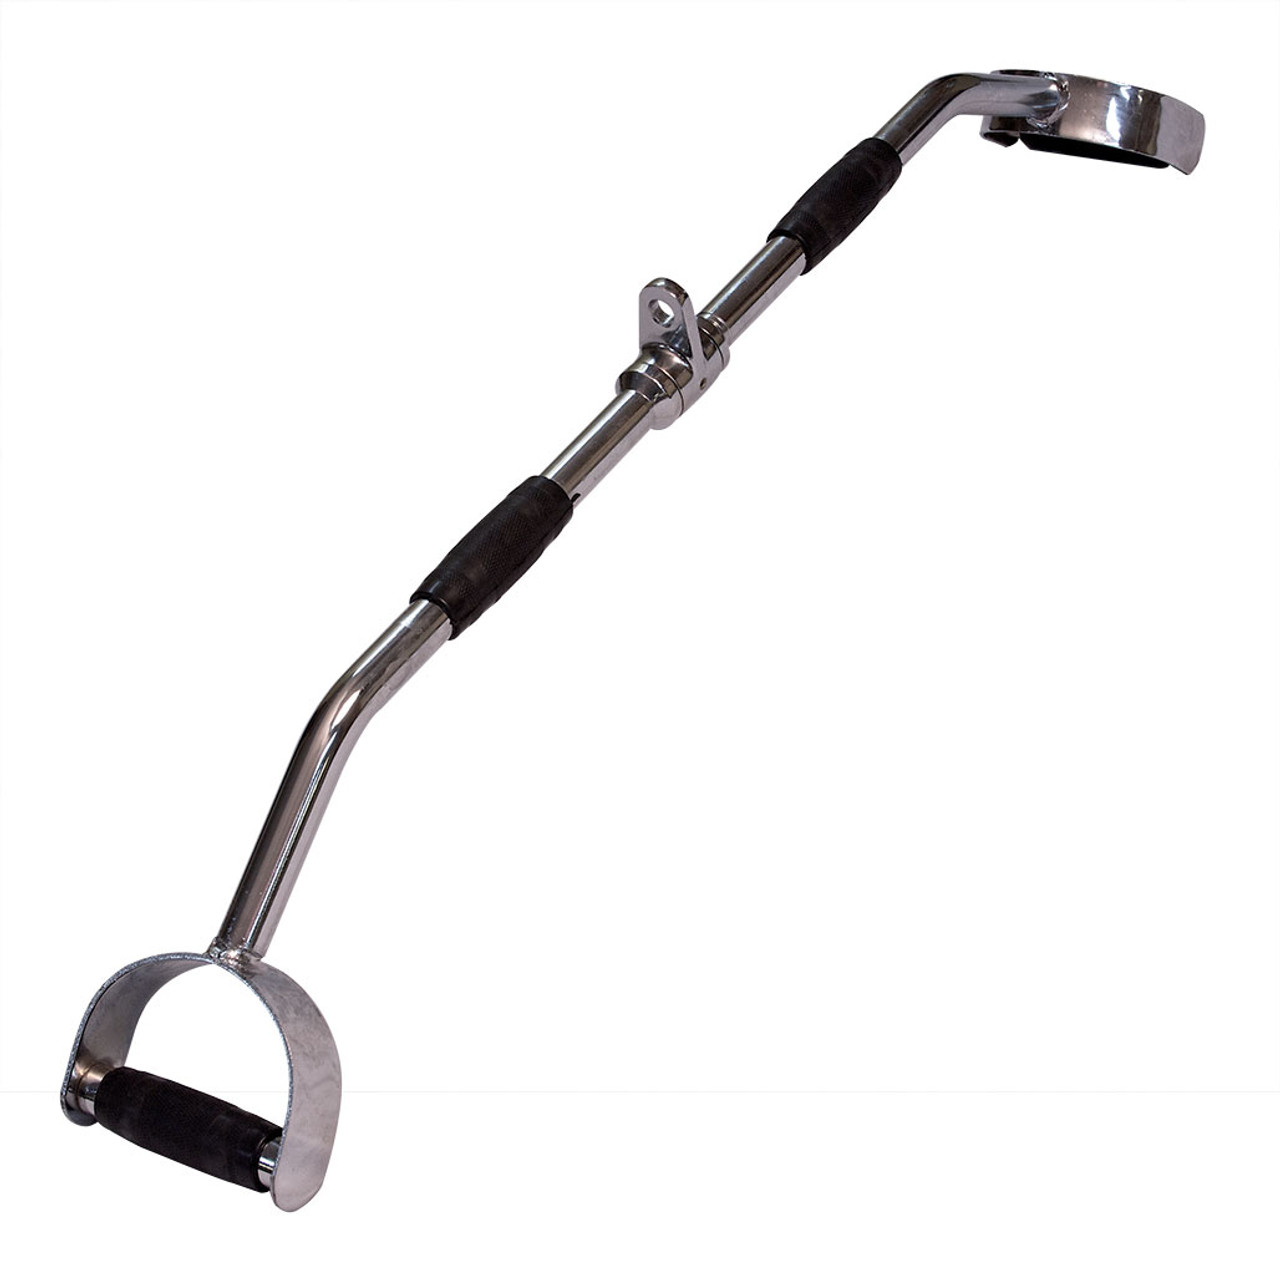 FitBar Lat Pulldown Bar is HERE! - FitBar